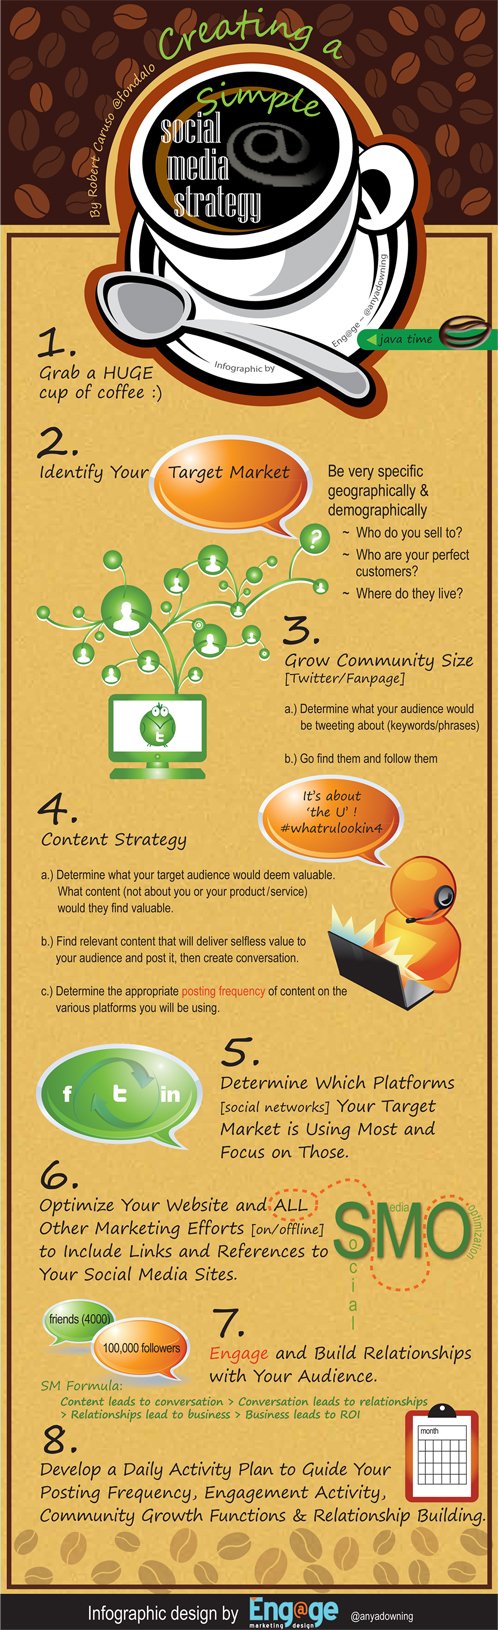 how to create a simple social media strategy